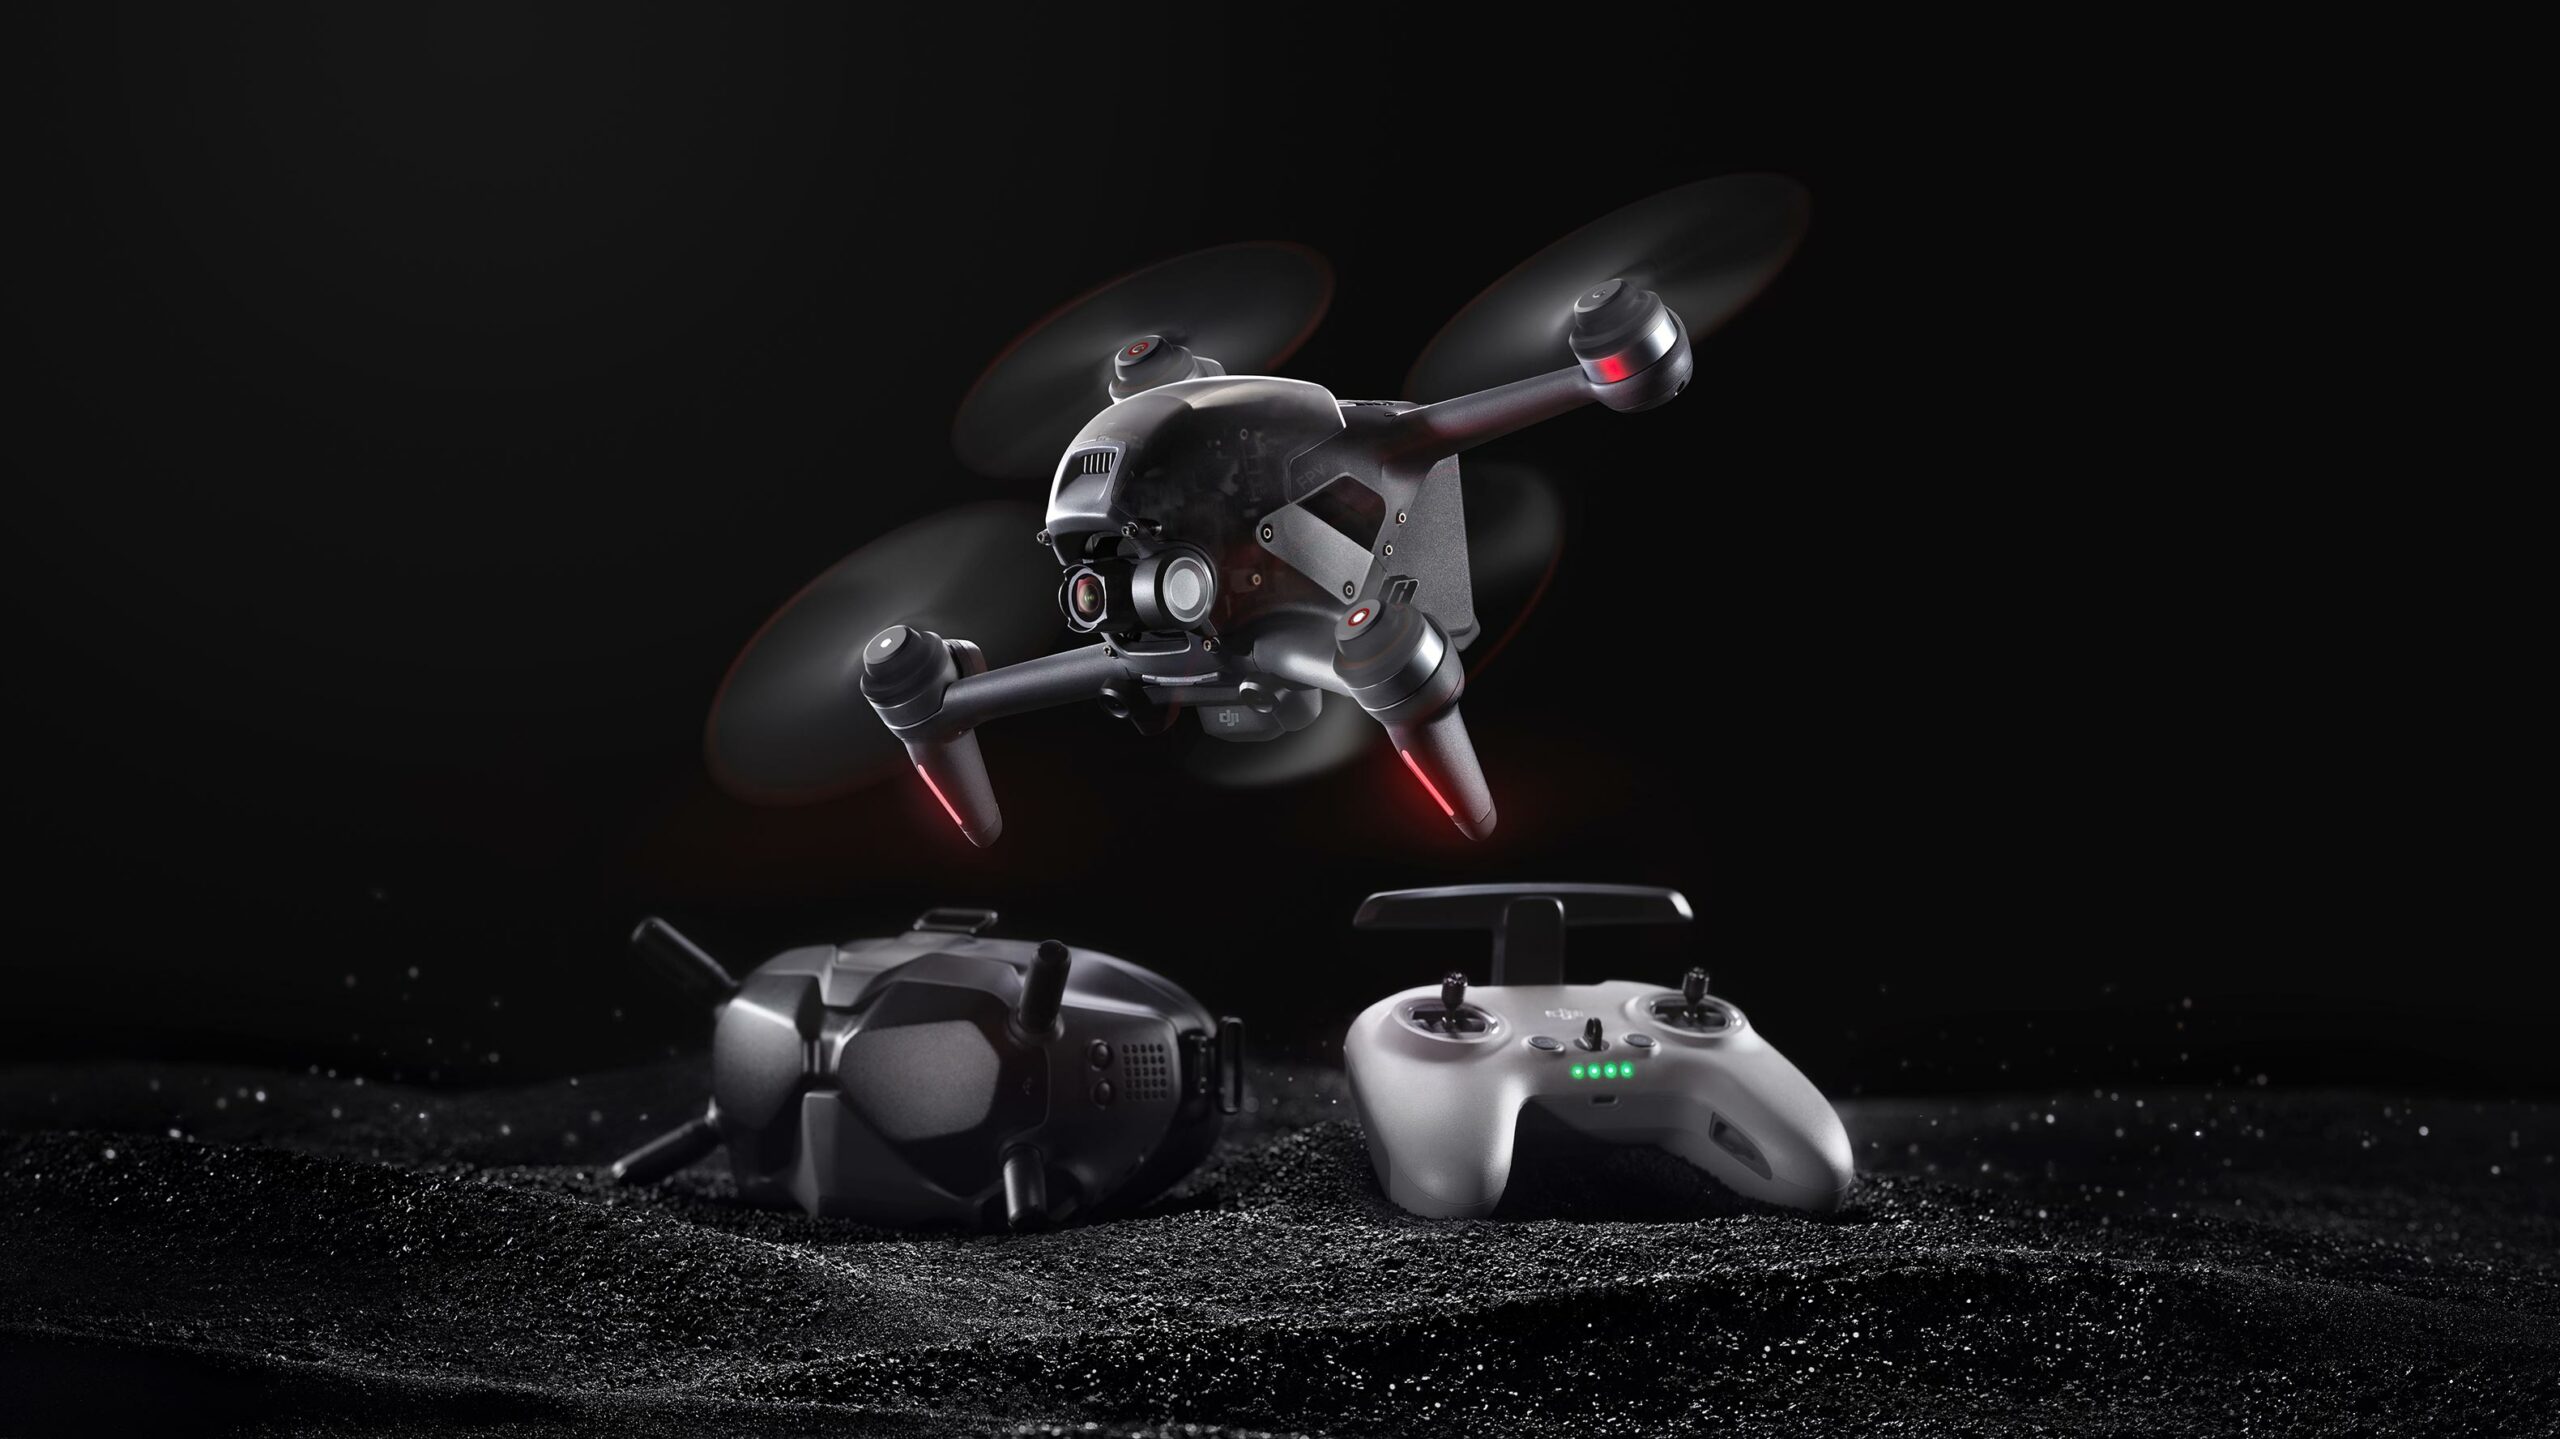 DJI enters the drone racing space with new FPV drone